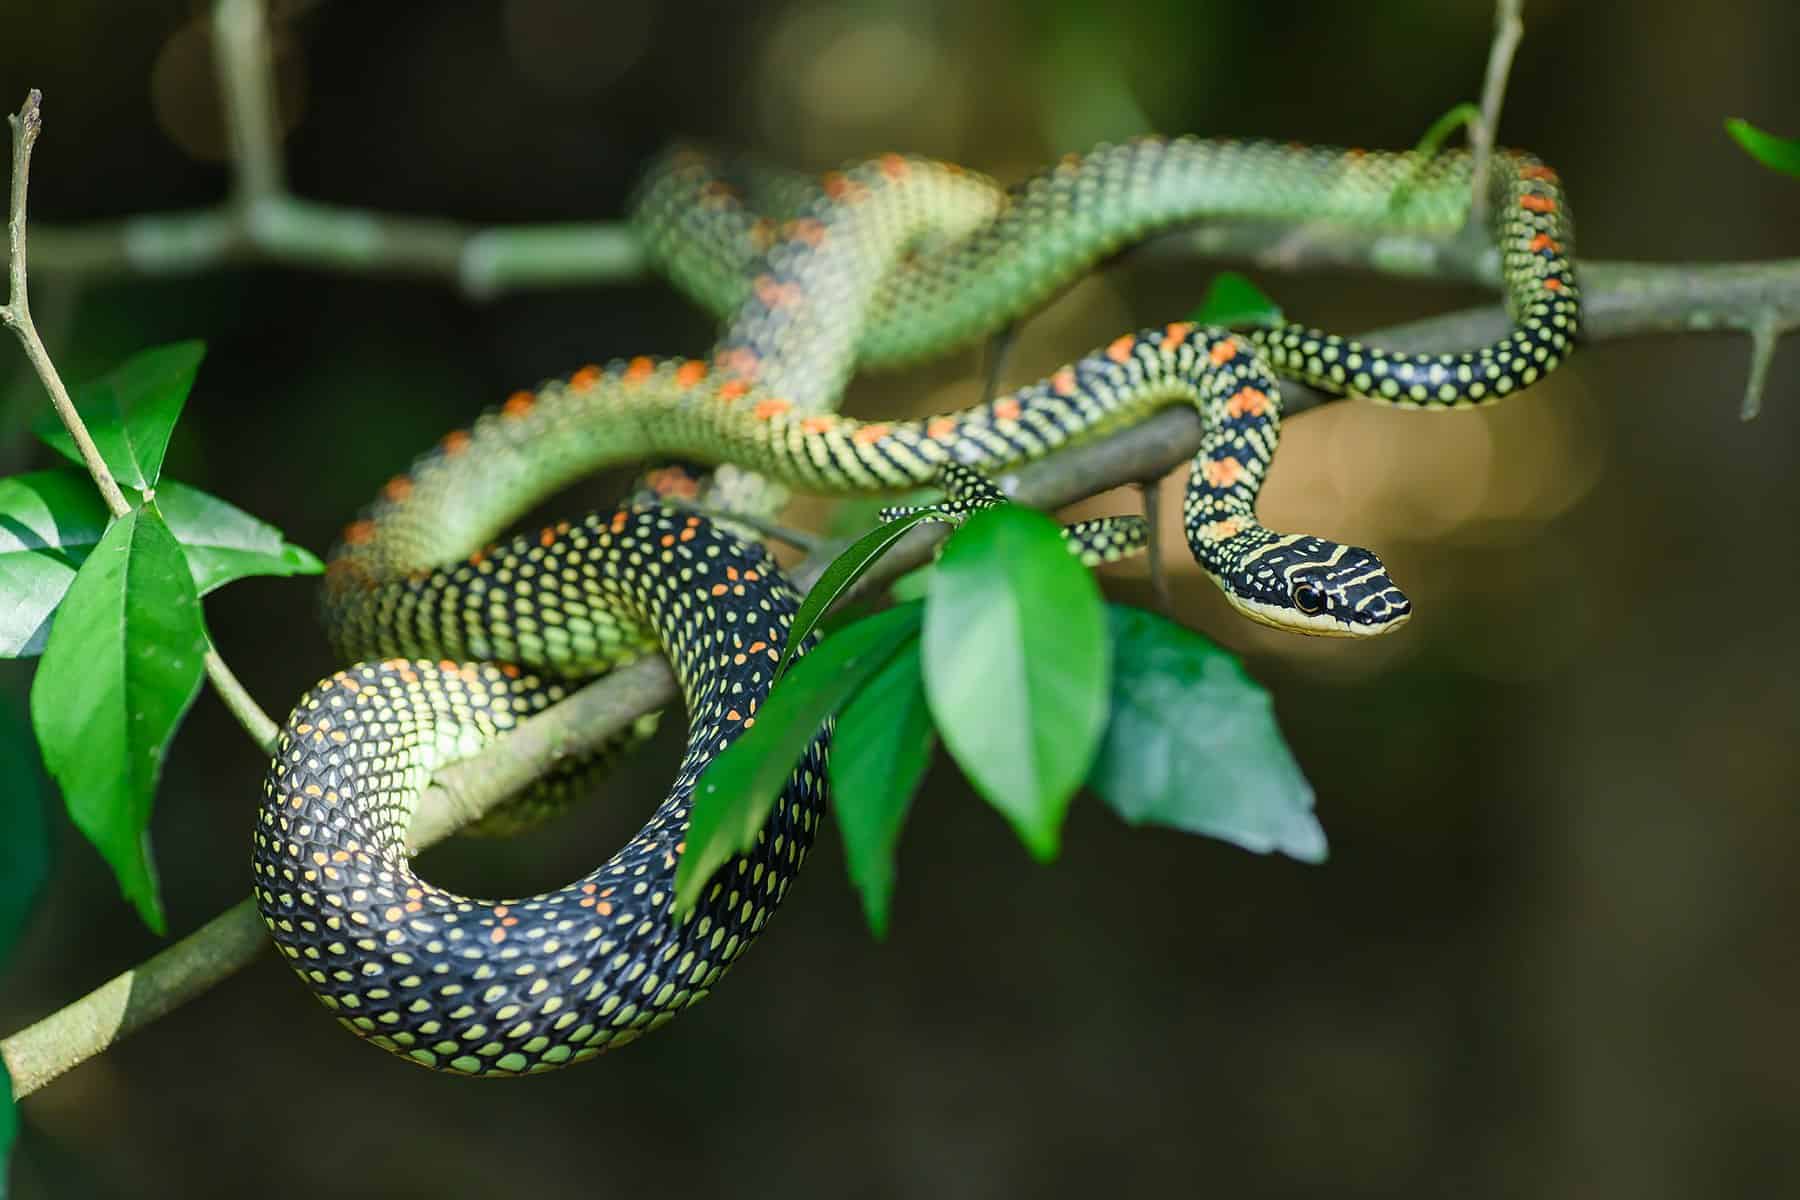 Common Snakes in Singapore - Paradise Tree Snake